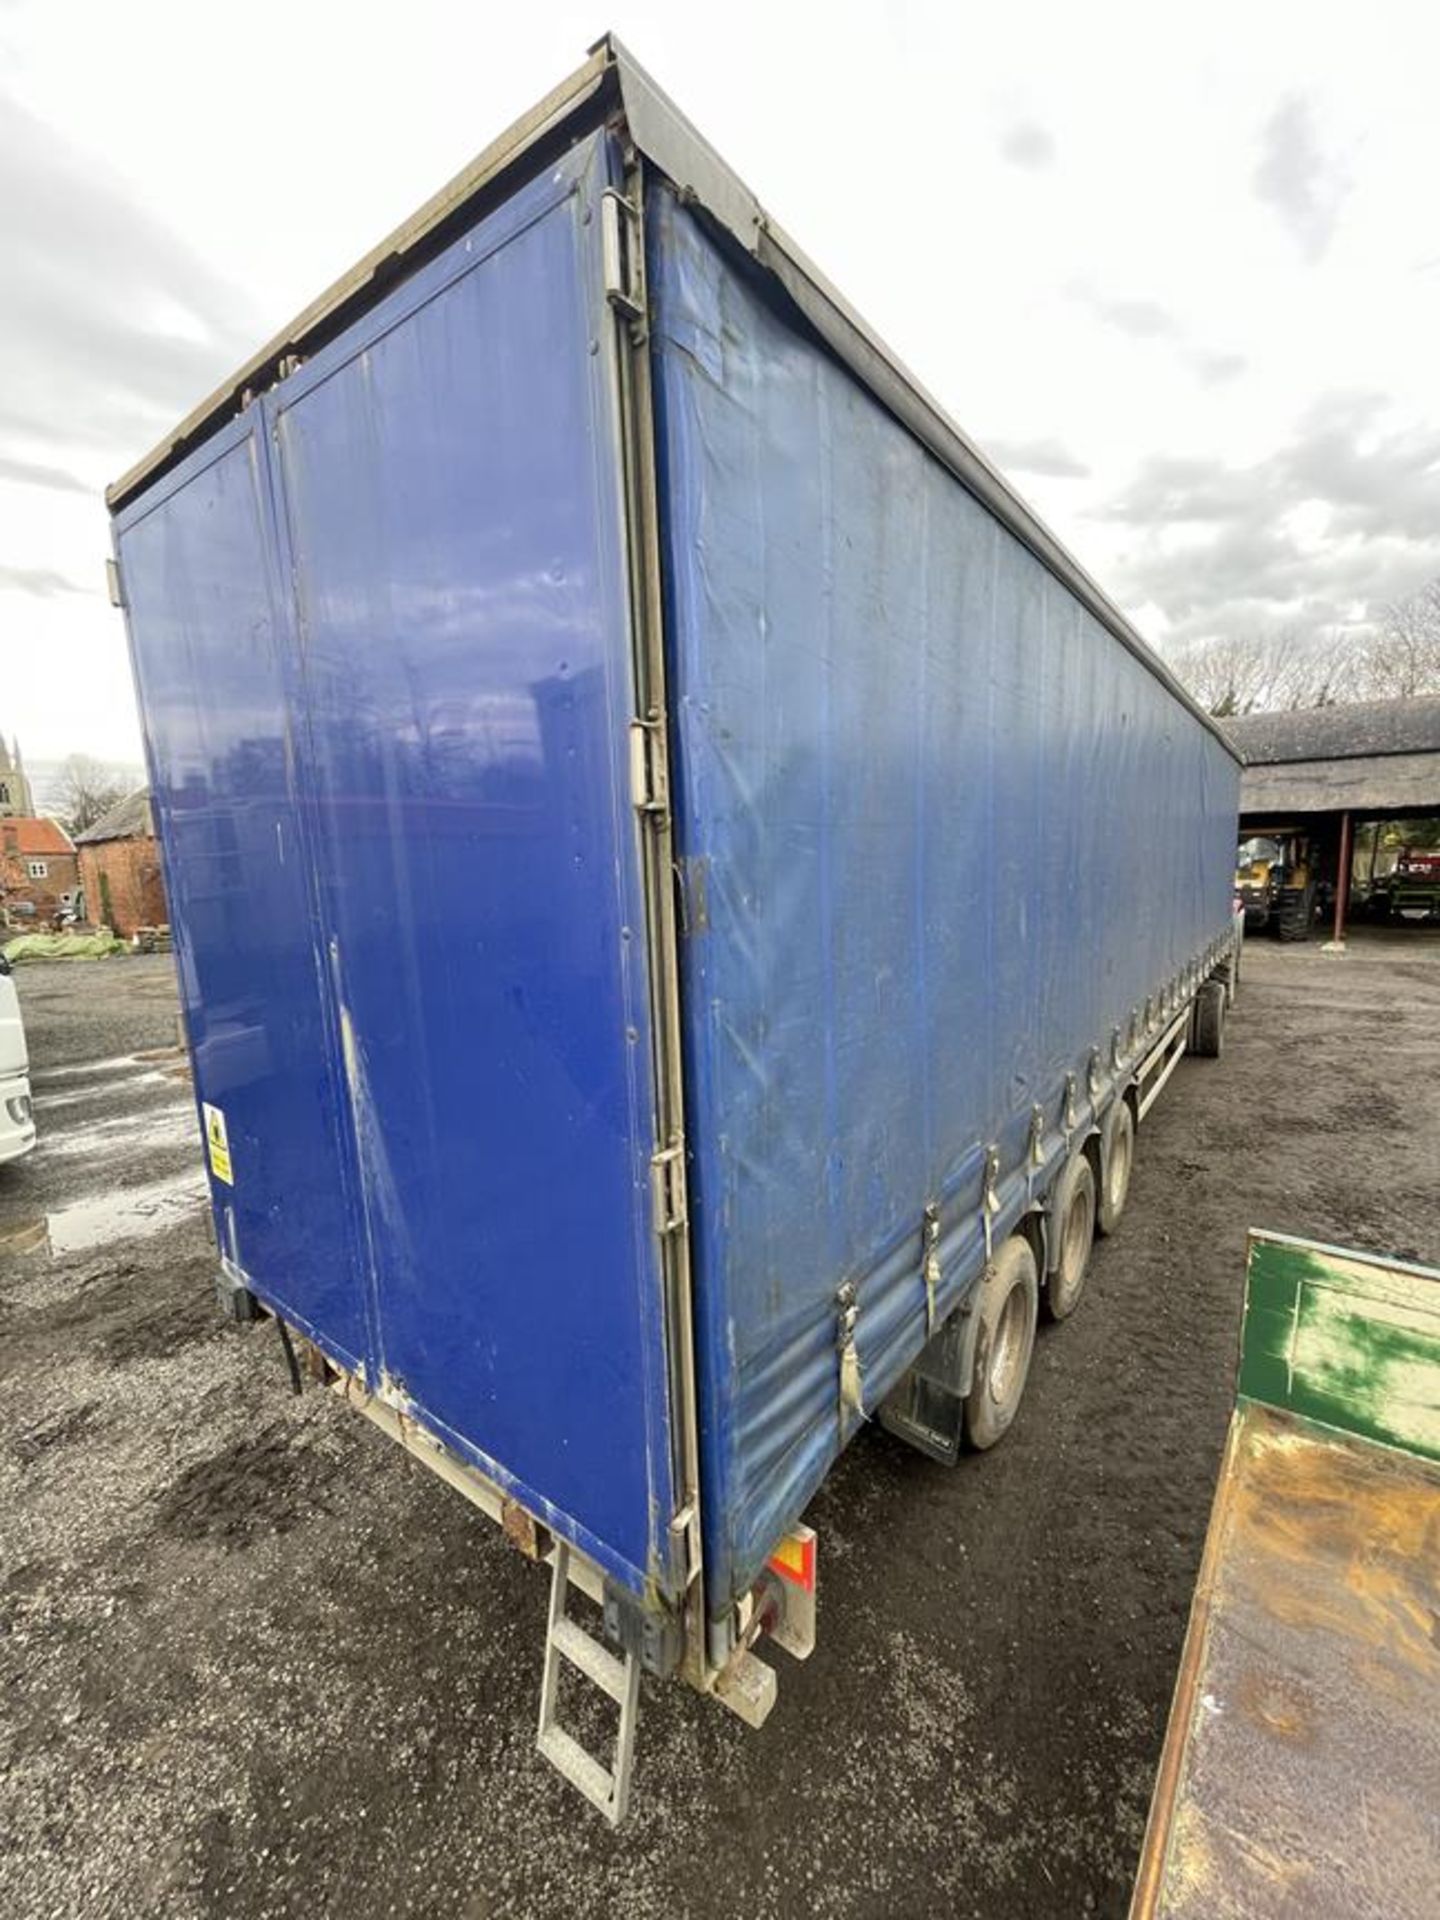 2006 Montracon EB+ ADR 25/2M Triple Axle Curtainside Trailer, VIN: 24688 with Rear Barn Doors. - Image 6 of 12